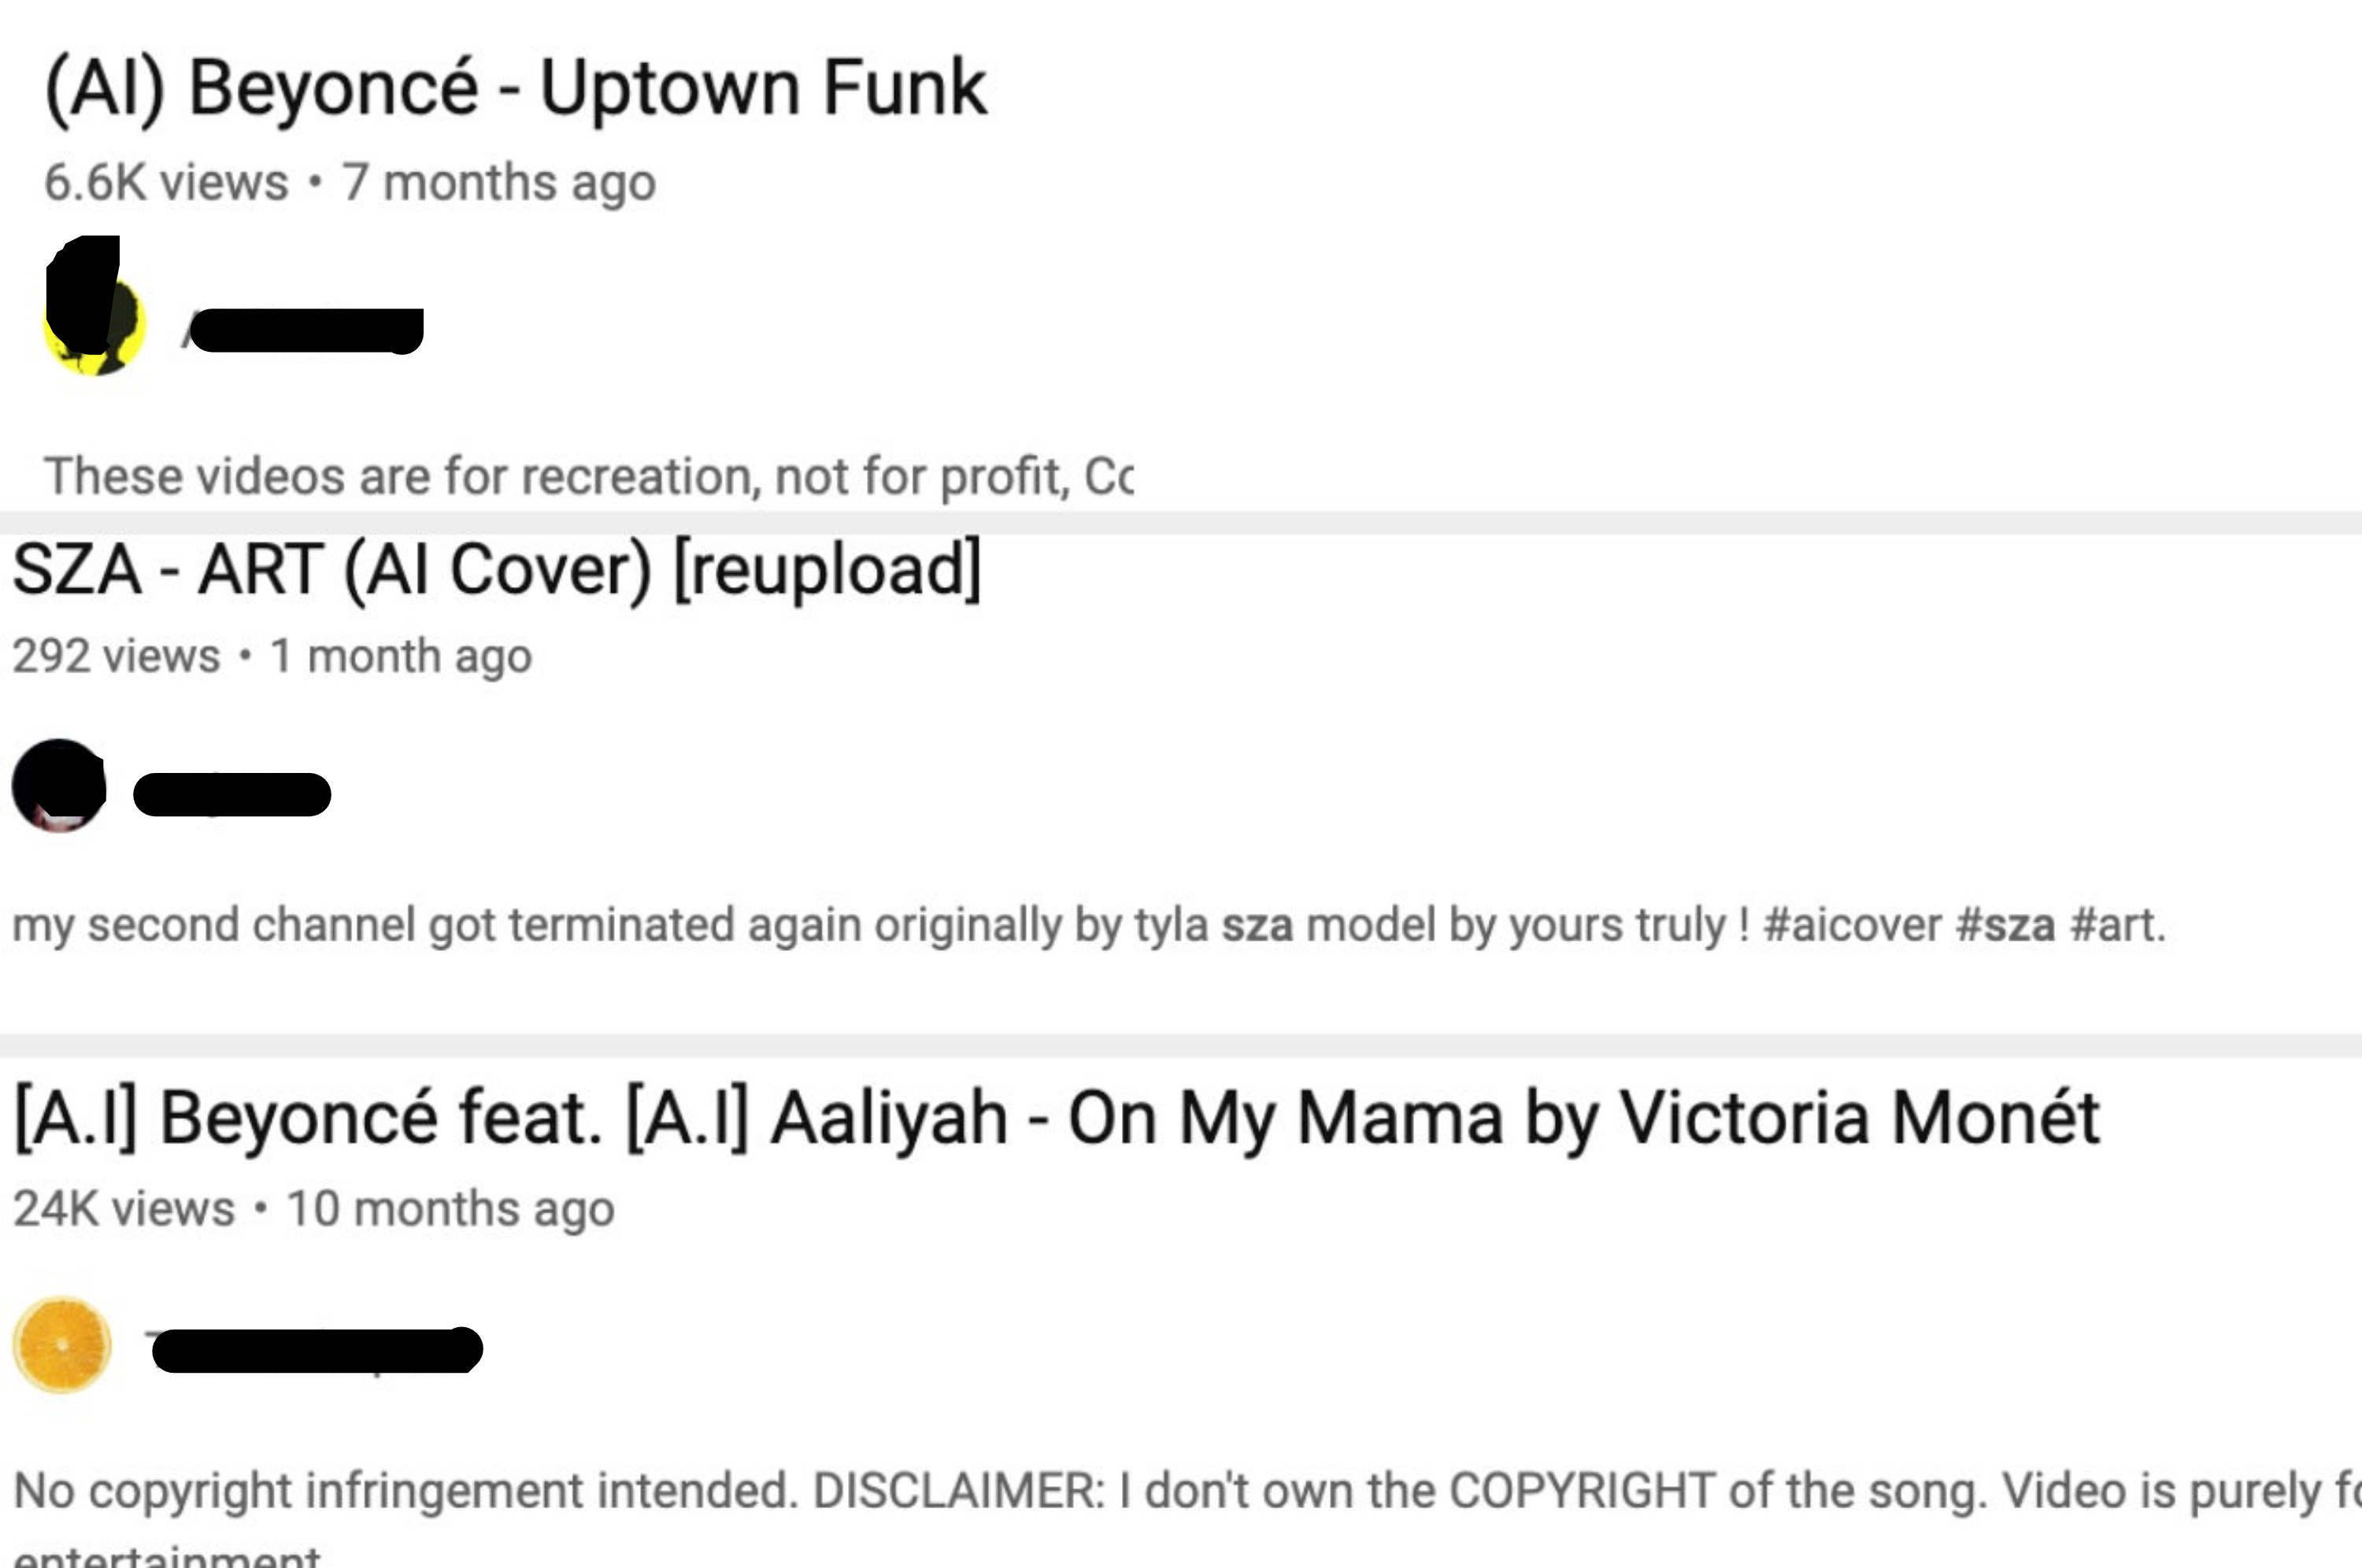 YouTube video listings with titles for AI covers from Beyoncé, SZA, Aaliyah, and Victoria Monét. Views, upload dates, and channel names included